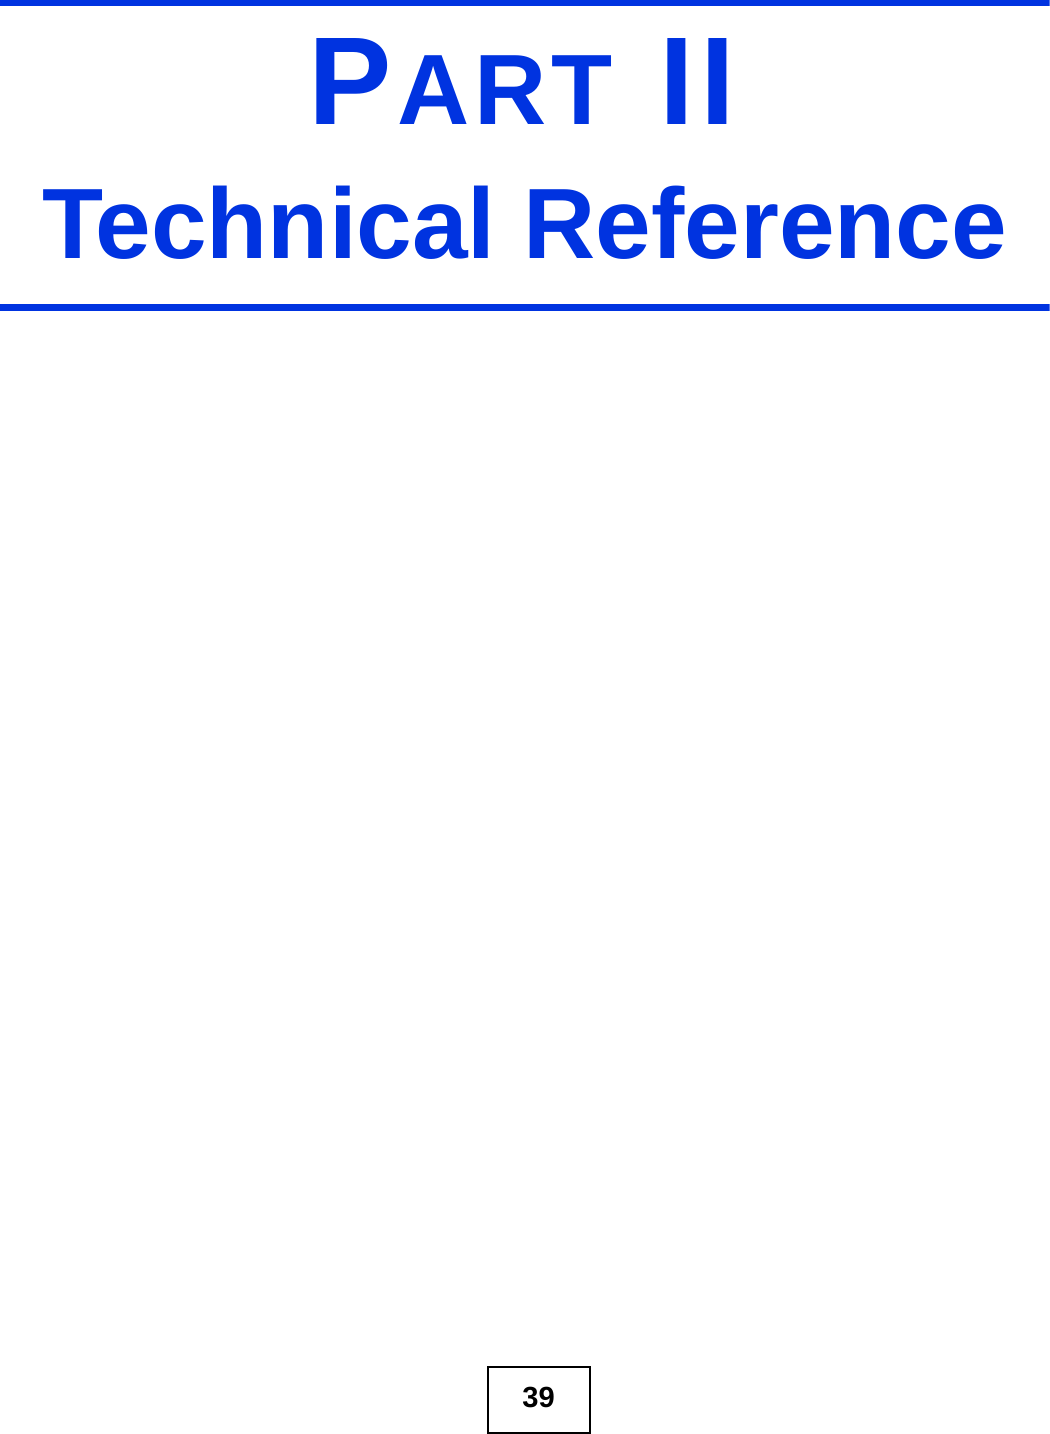 39PART IITechnical Reference